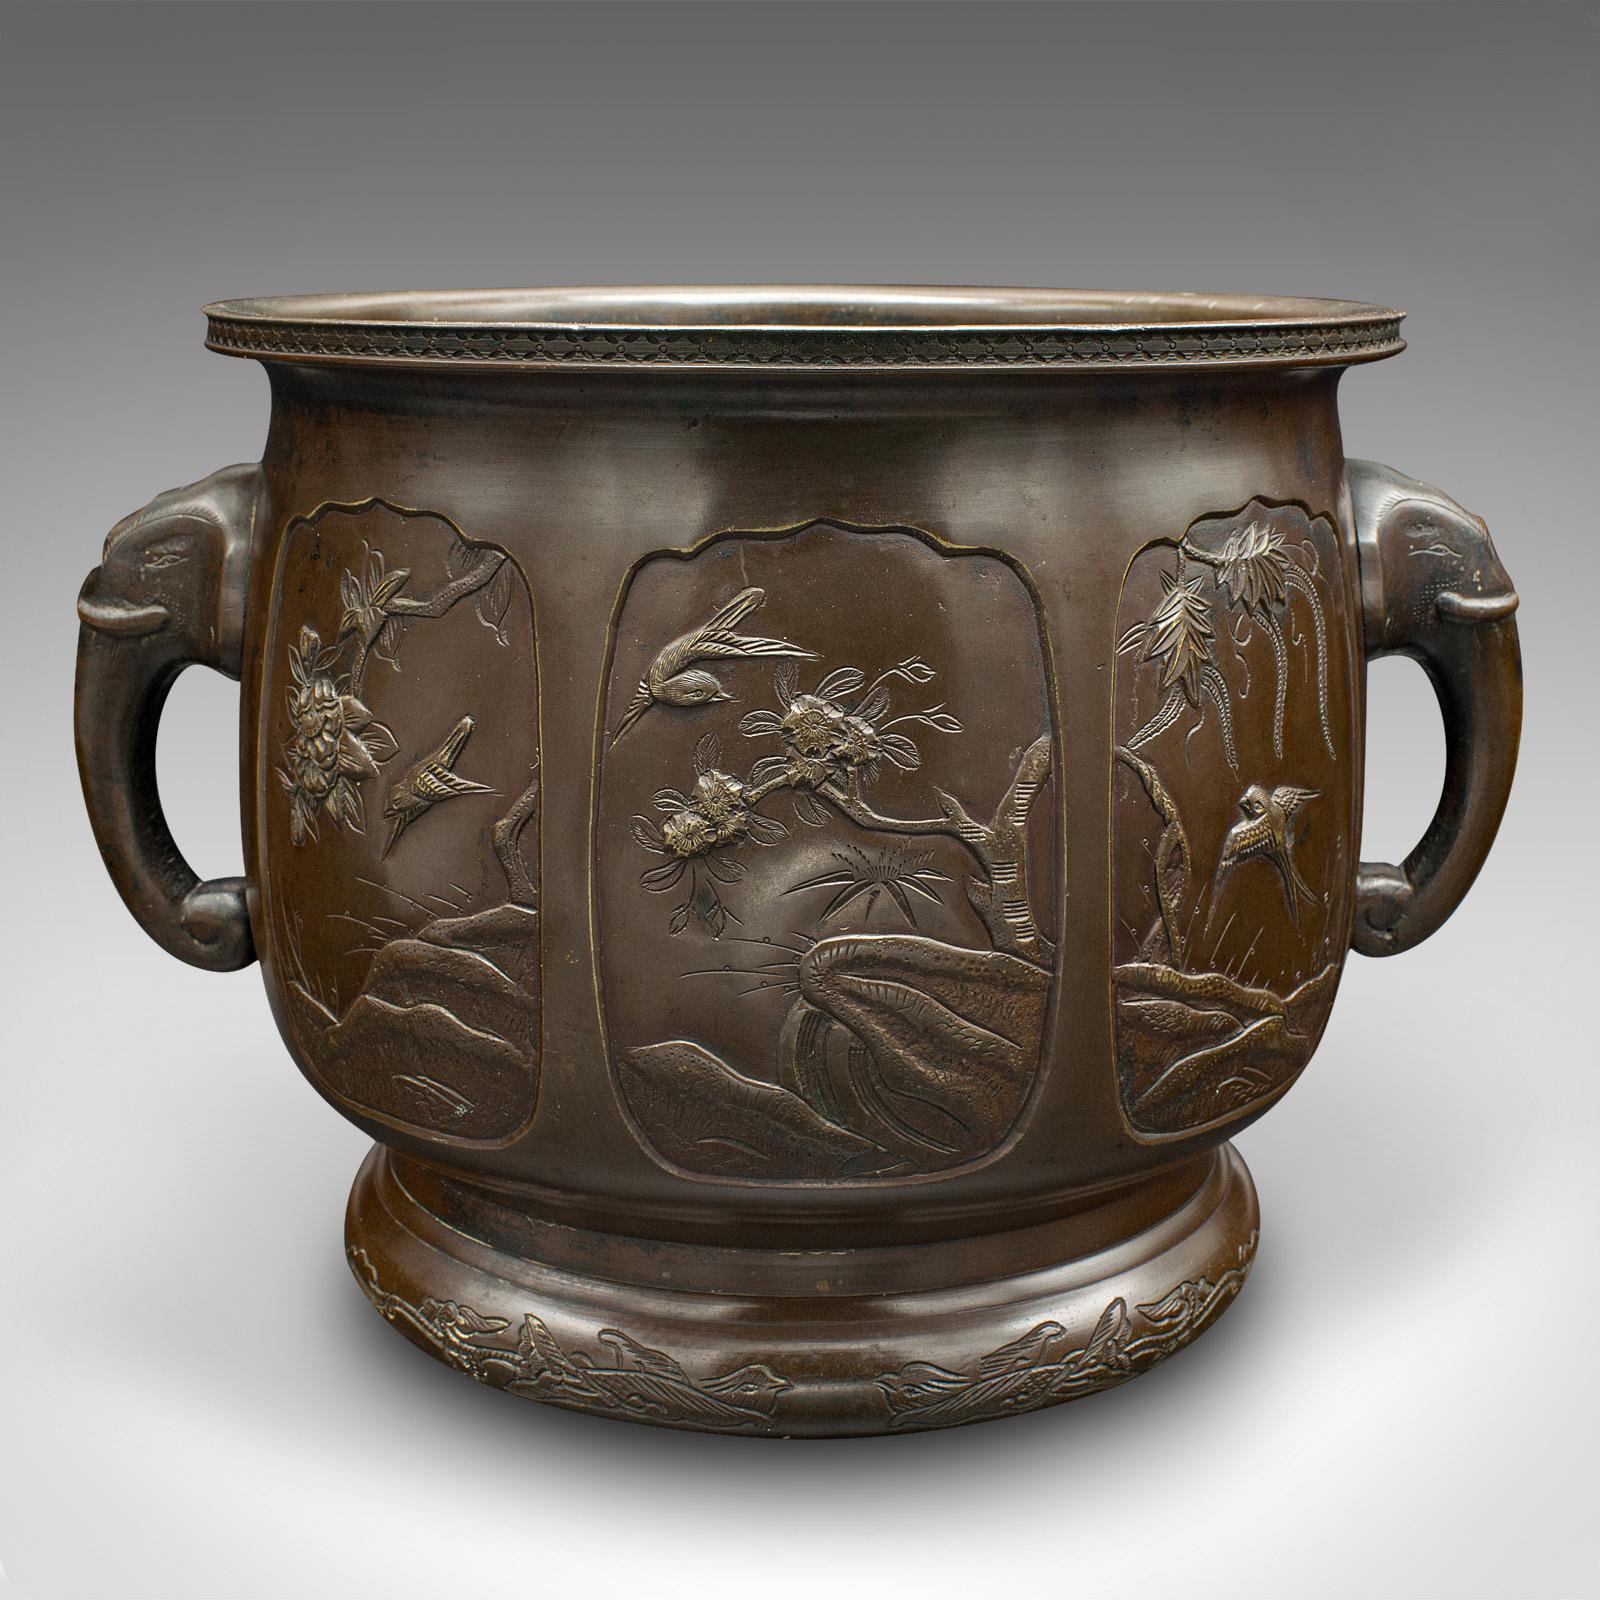 This is an antique planter. A Japanese, bronze decorative jardiniere in Tokugawa or Edo taste, dating to the mid Victorian period, circa 1860.

Fascinatingly decorative planter with delightful Japanese taste
Displays a desirable aged patina and in